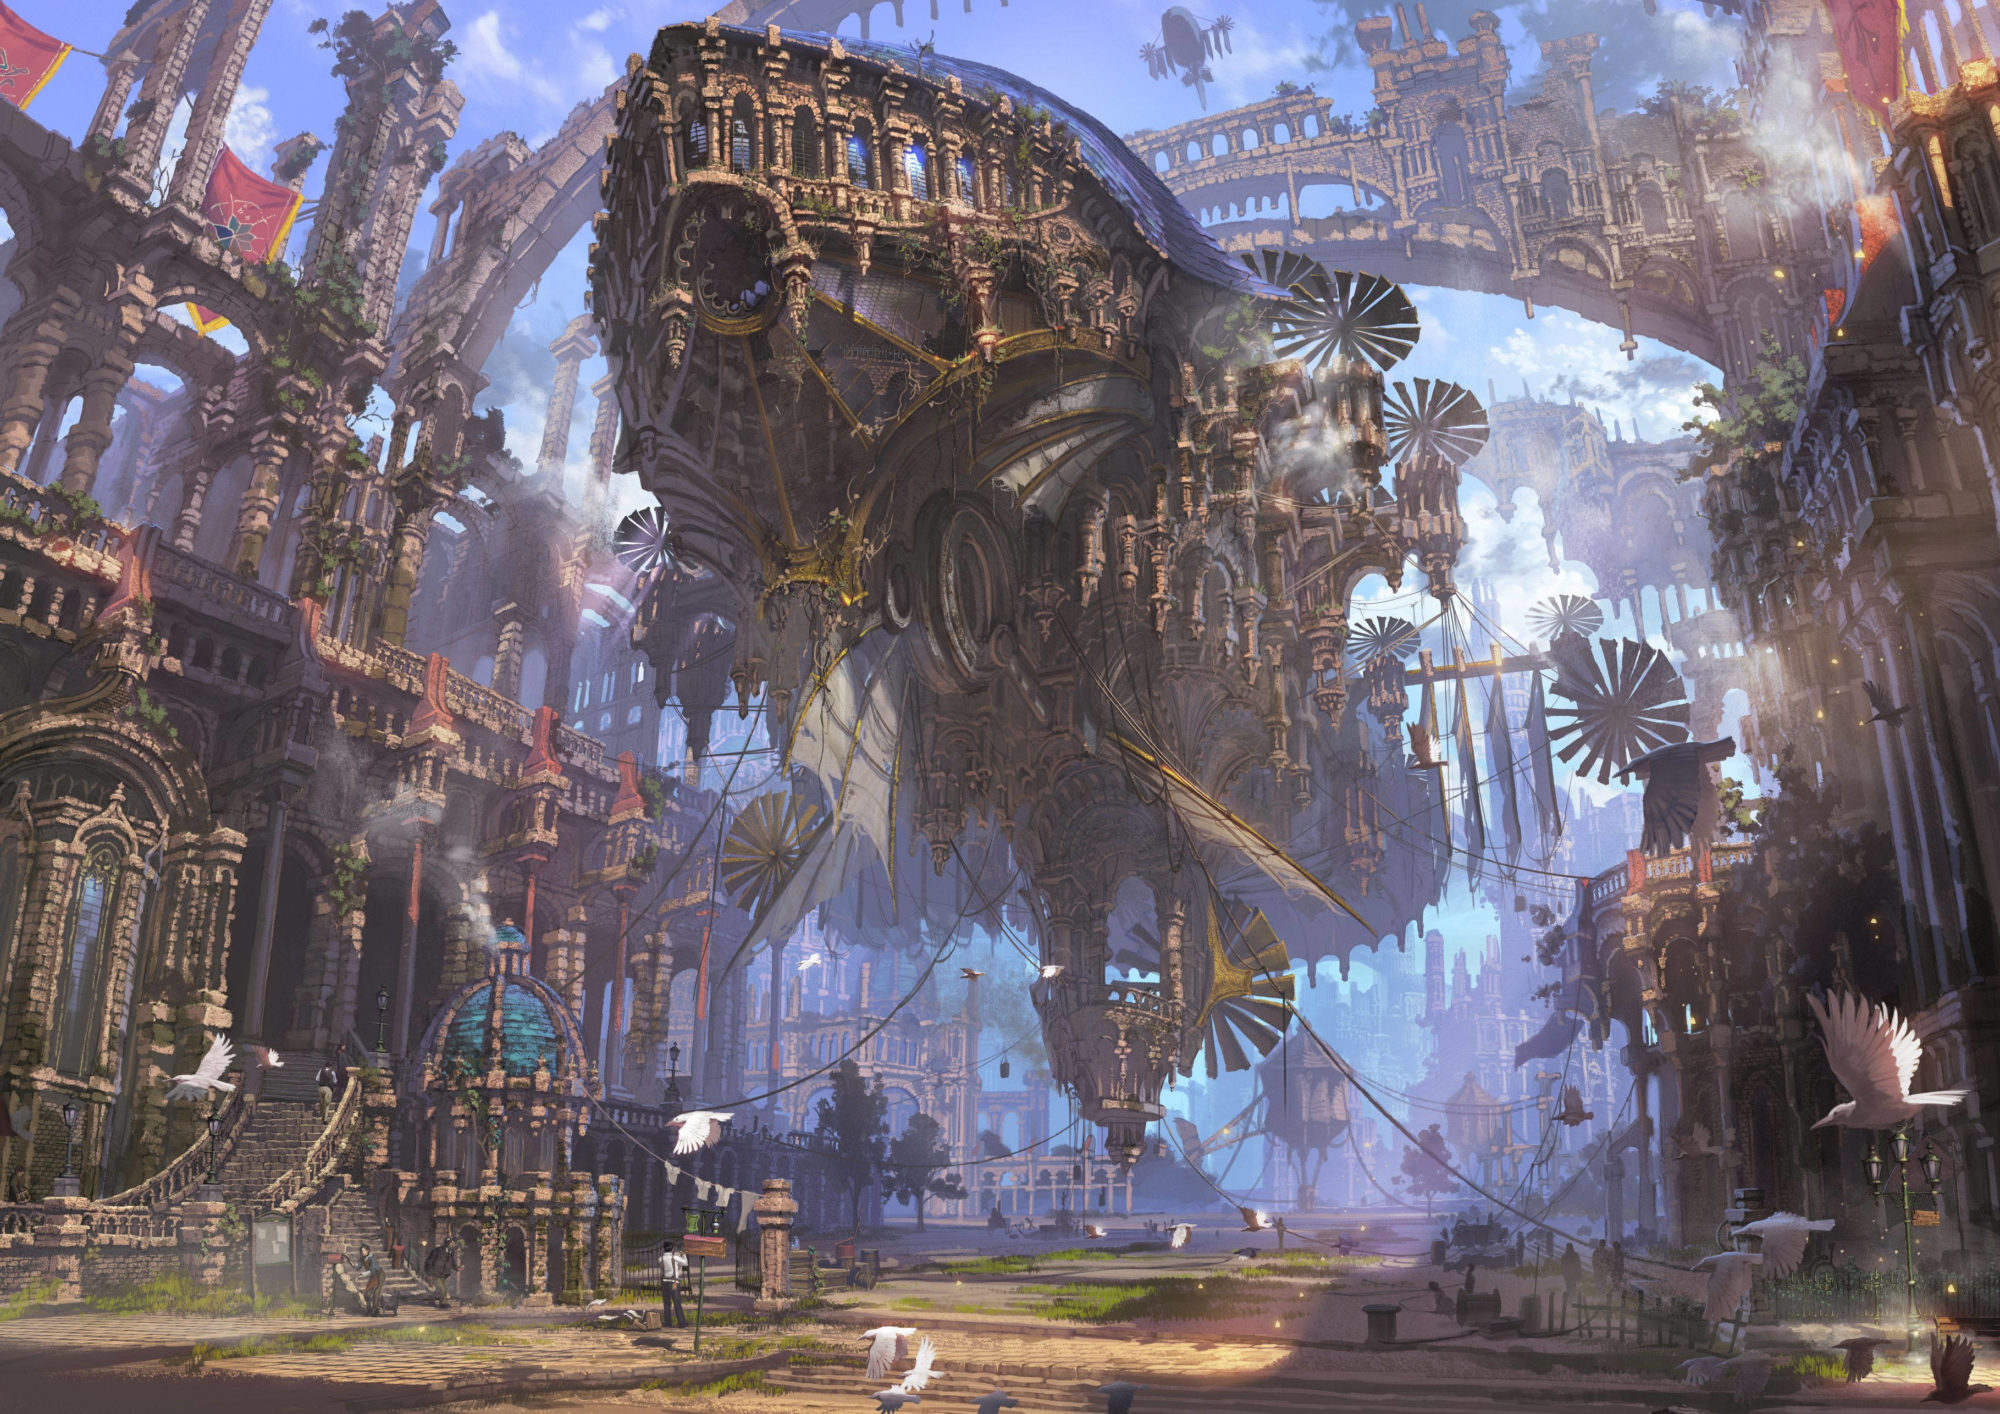 An intricate airship hovers amongst a metal jungle that poses as a city